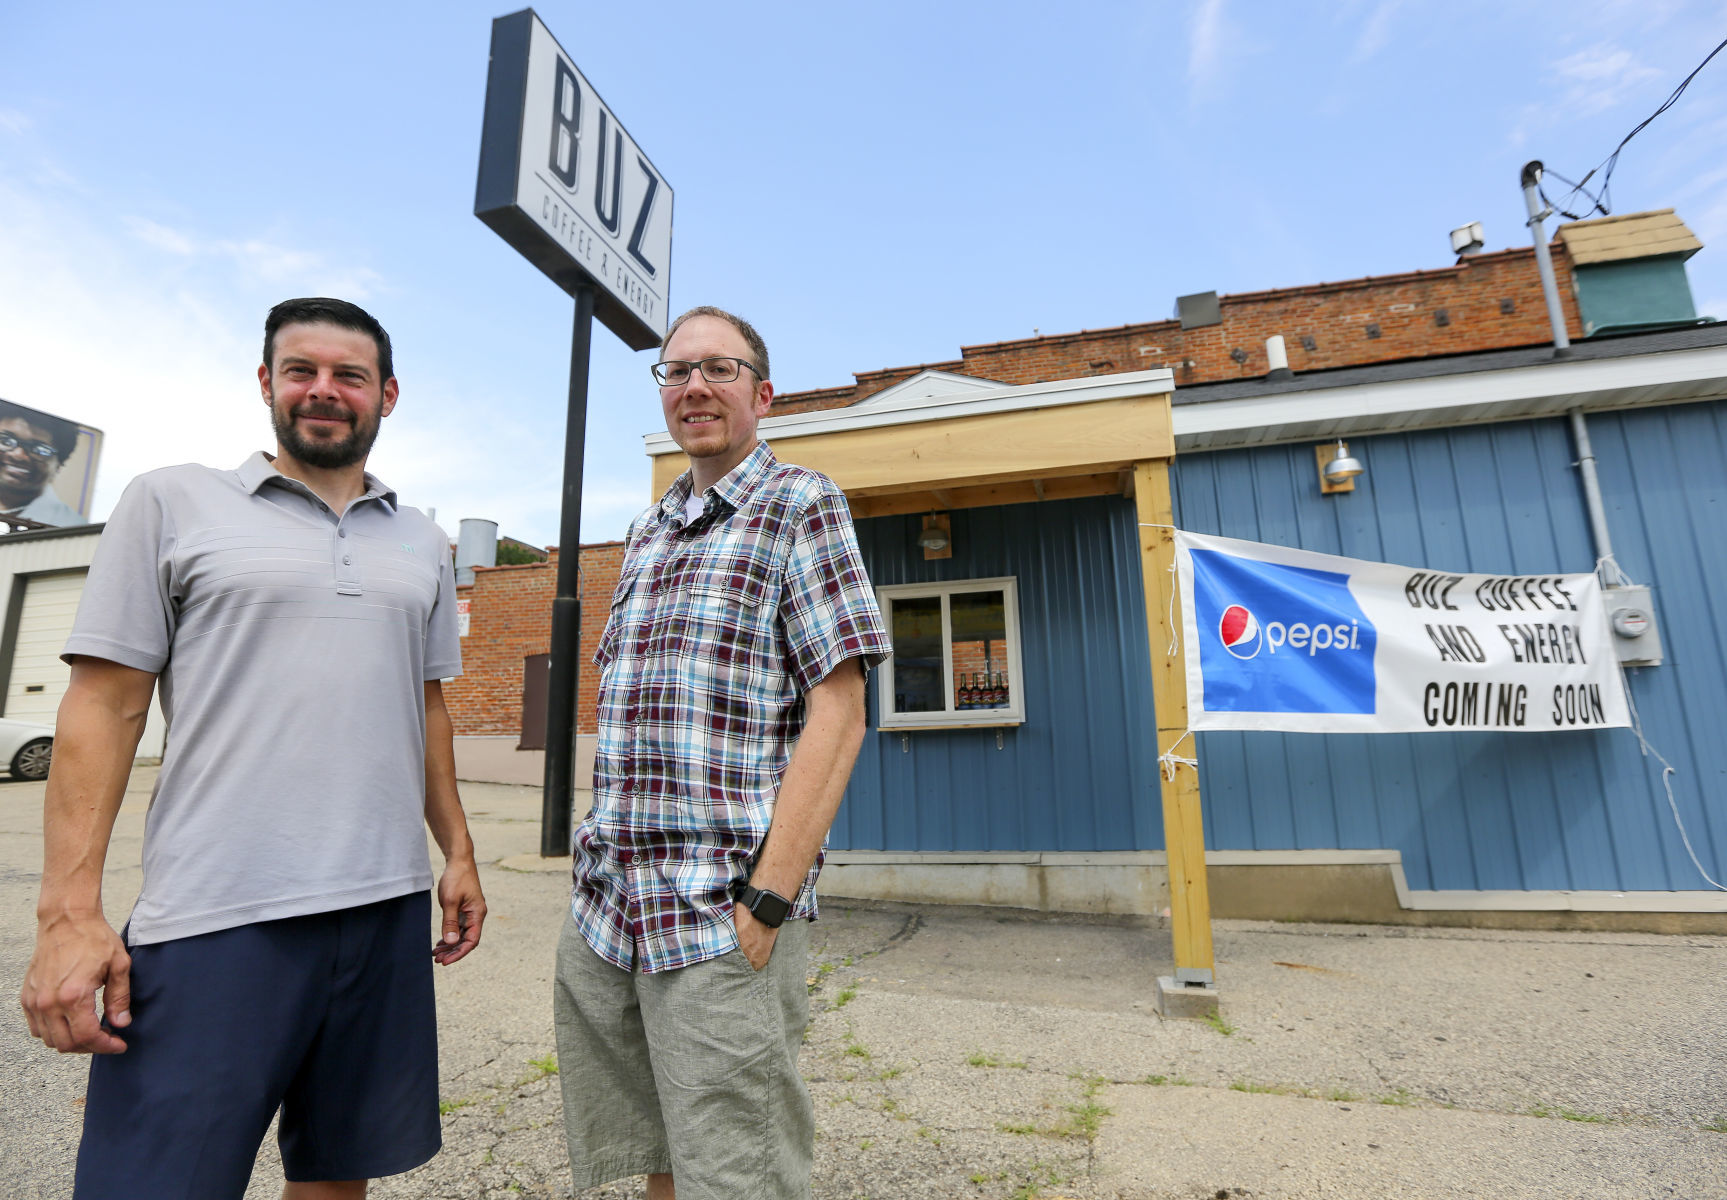 Buz Coffee & Energy owners Tony Hesselman (left) and Jeremy Patrum stand outside of their business in downtown Dubuque. PHOTO CREDIT: Dave Kettering